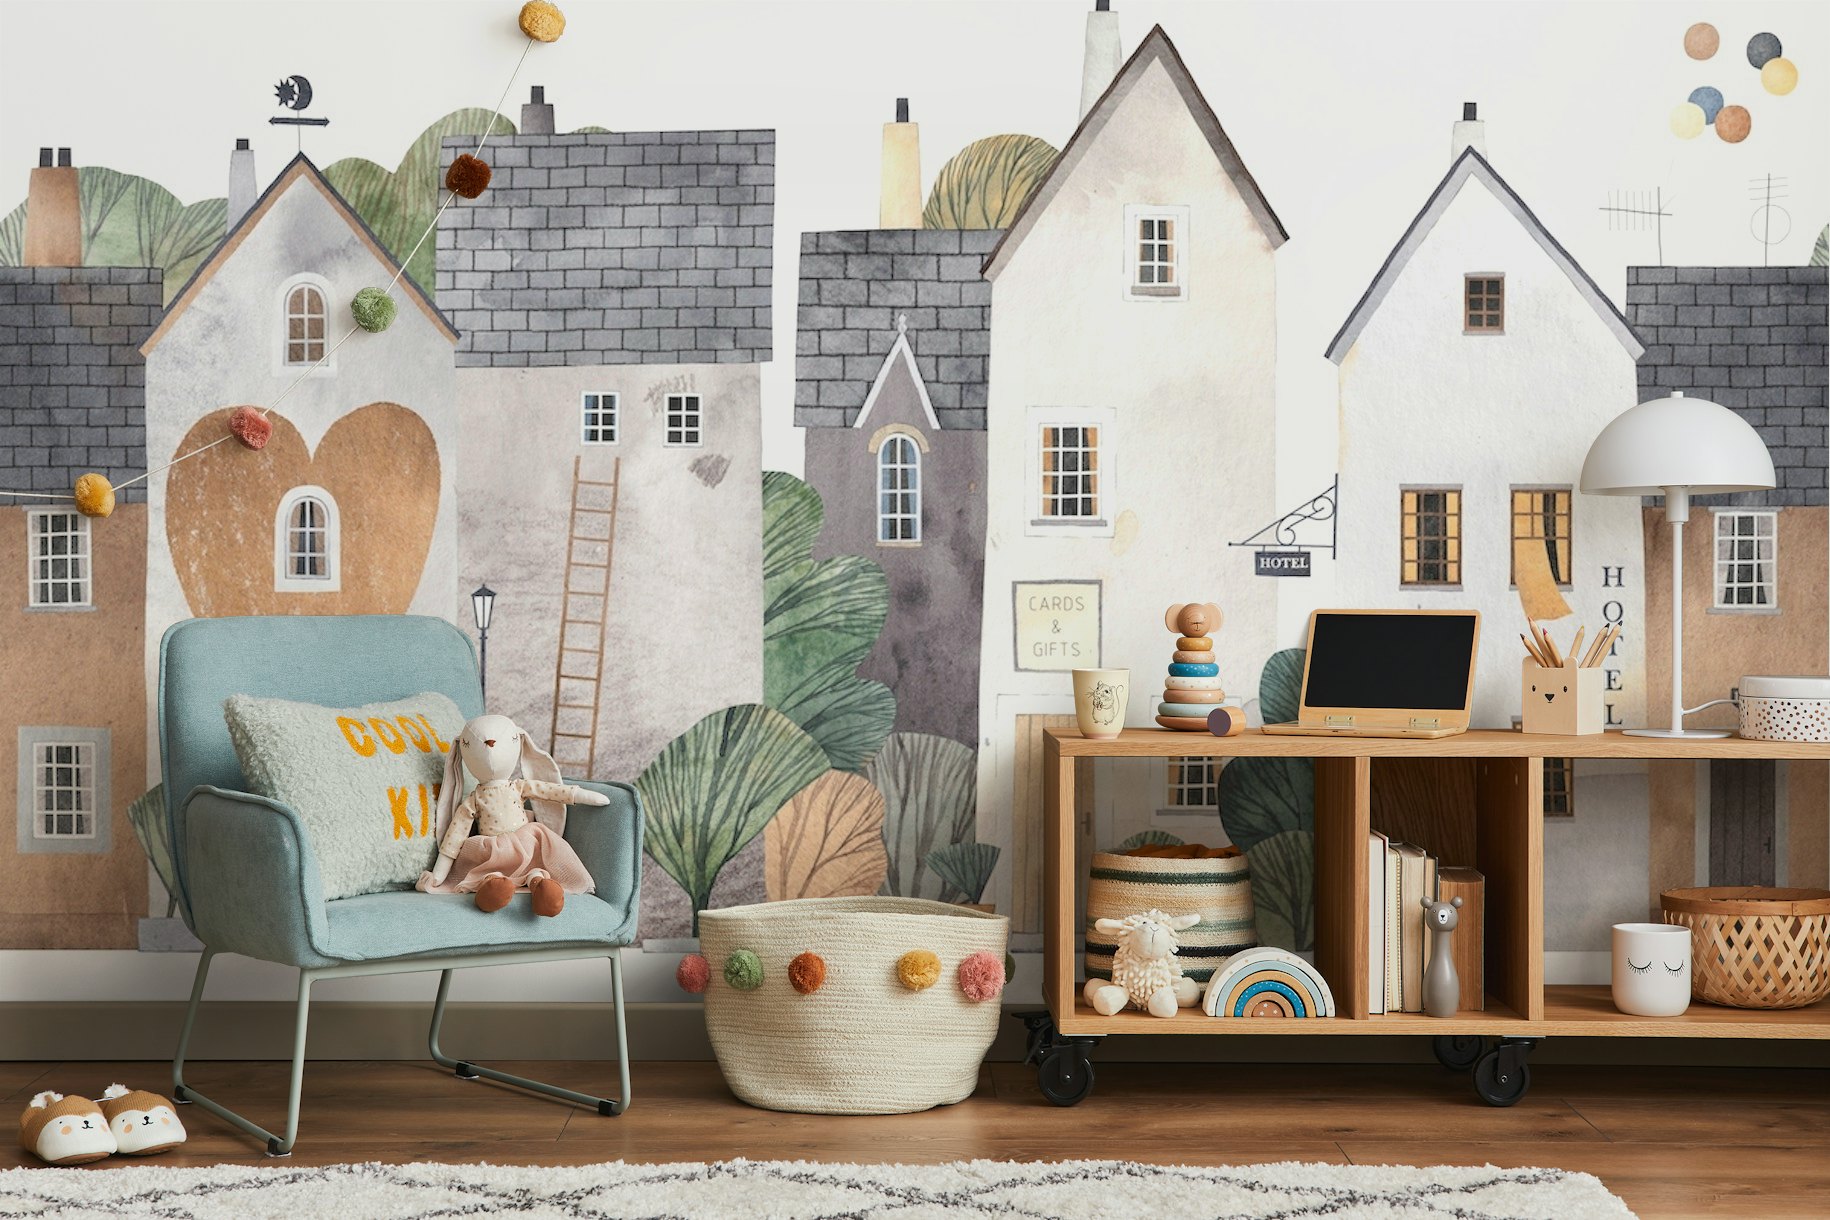 Cute town wallpaper - Free shipping | Happywall